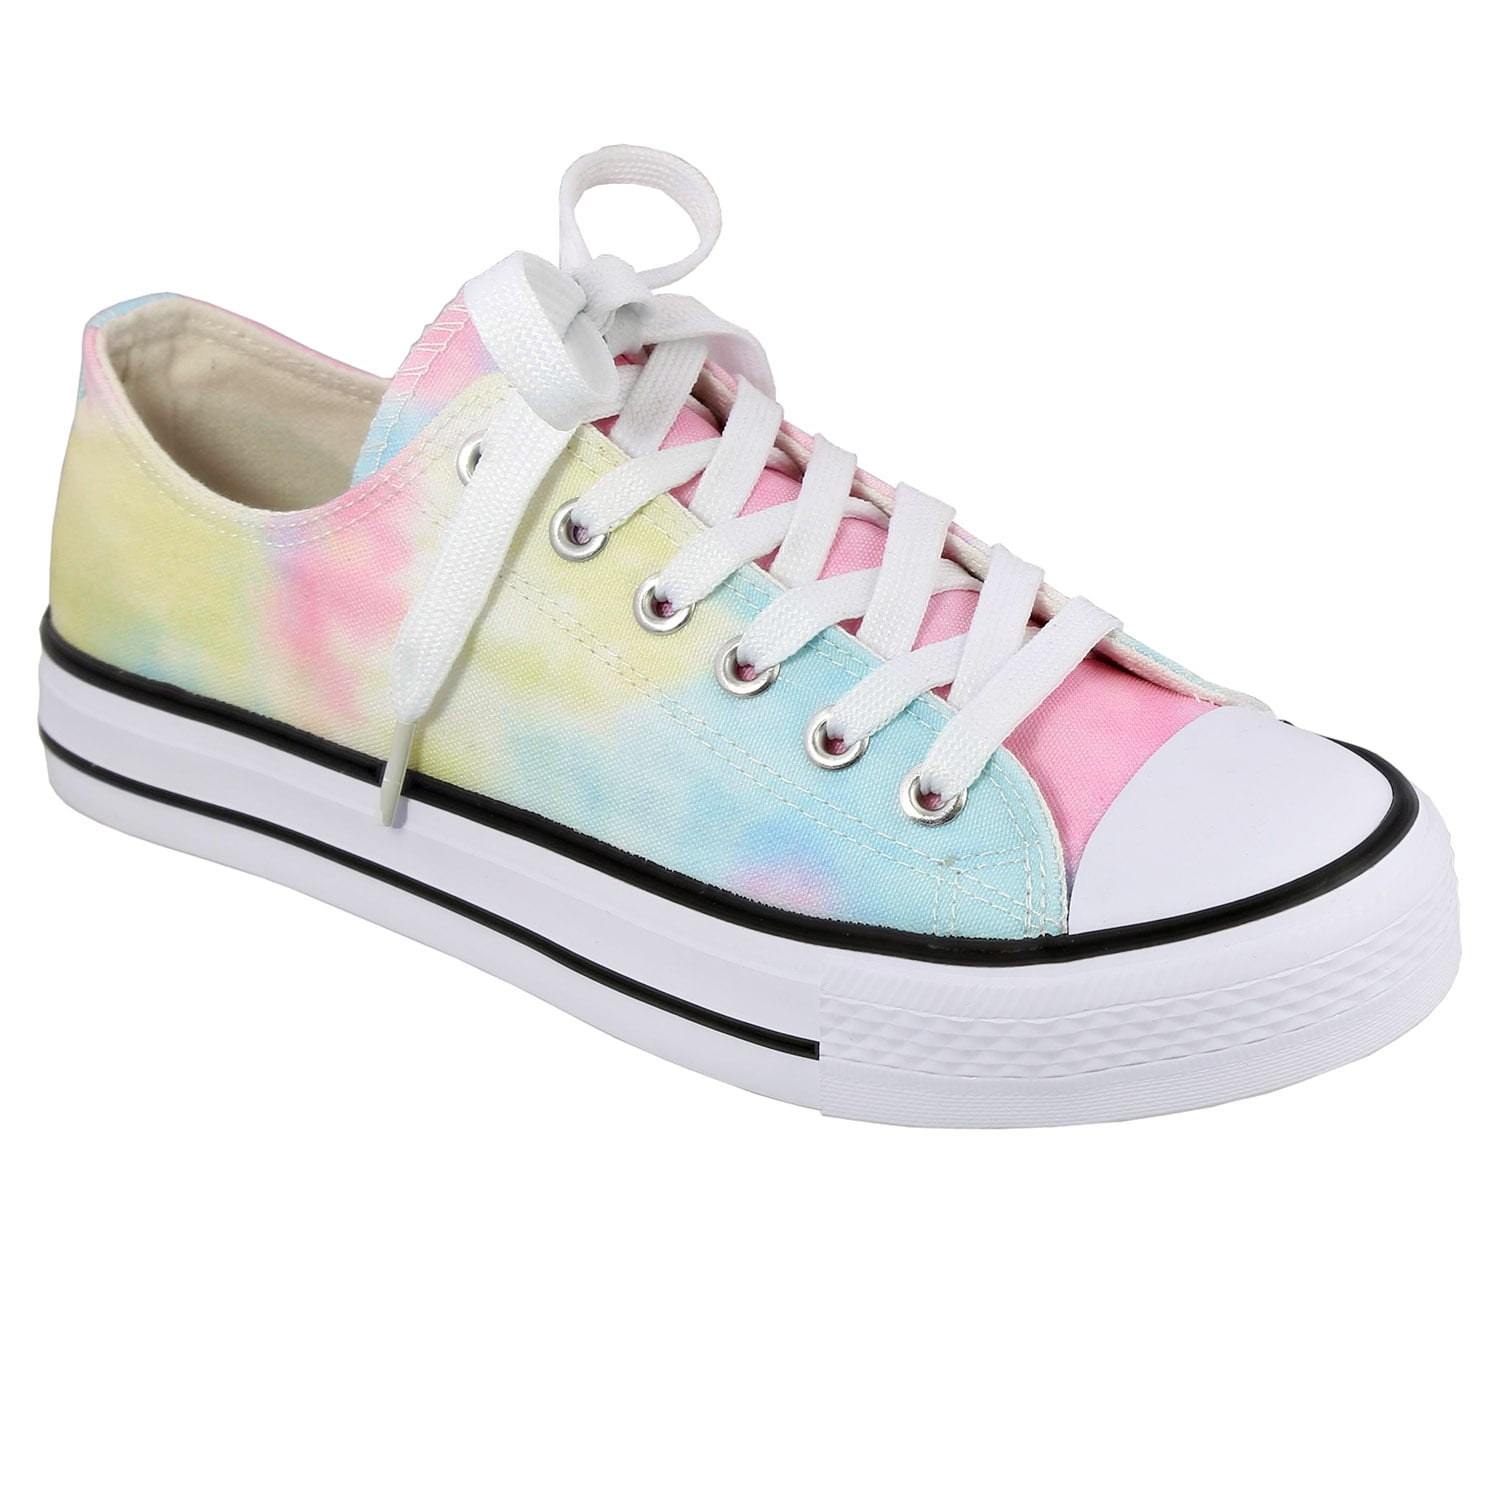 Womenss Shoes Ladies Girls Kids Canvas High Top Lace up Pumps/Casual Sneakers/Trainers Shoes 